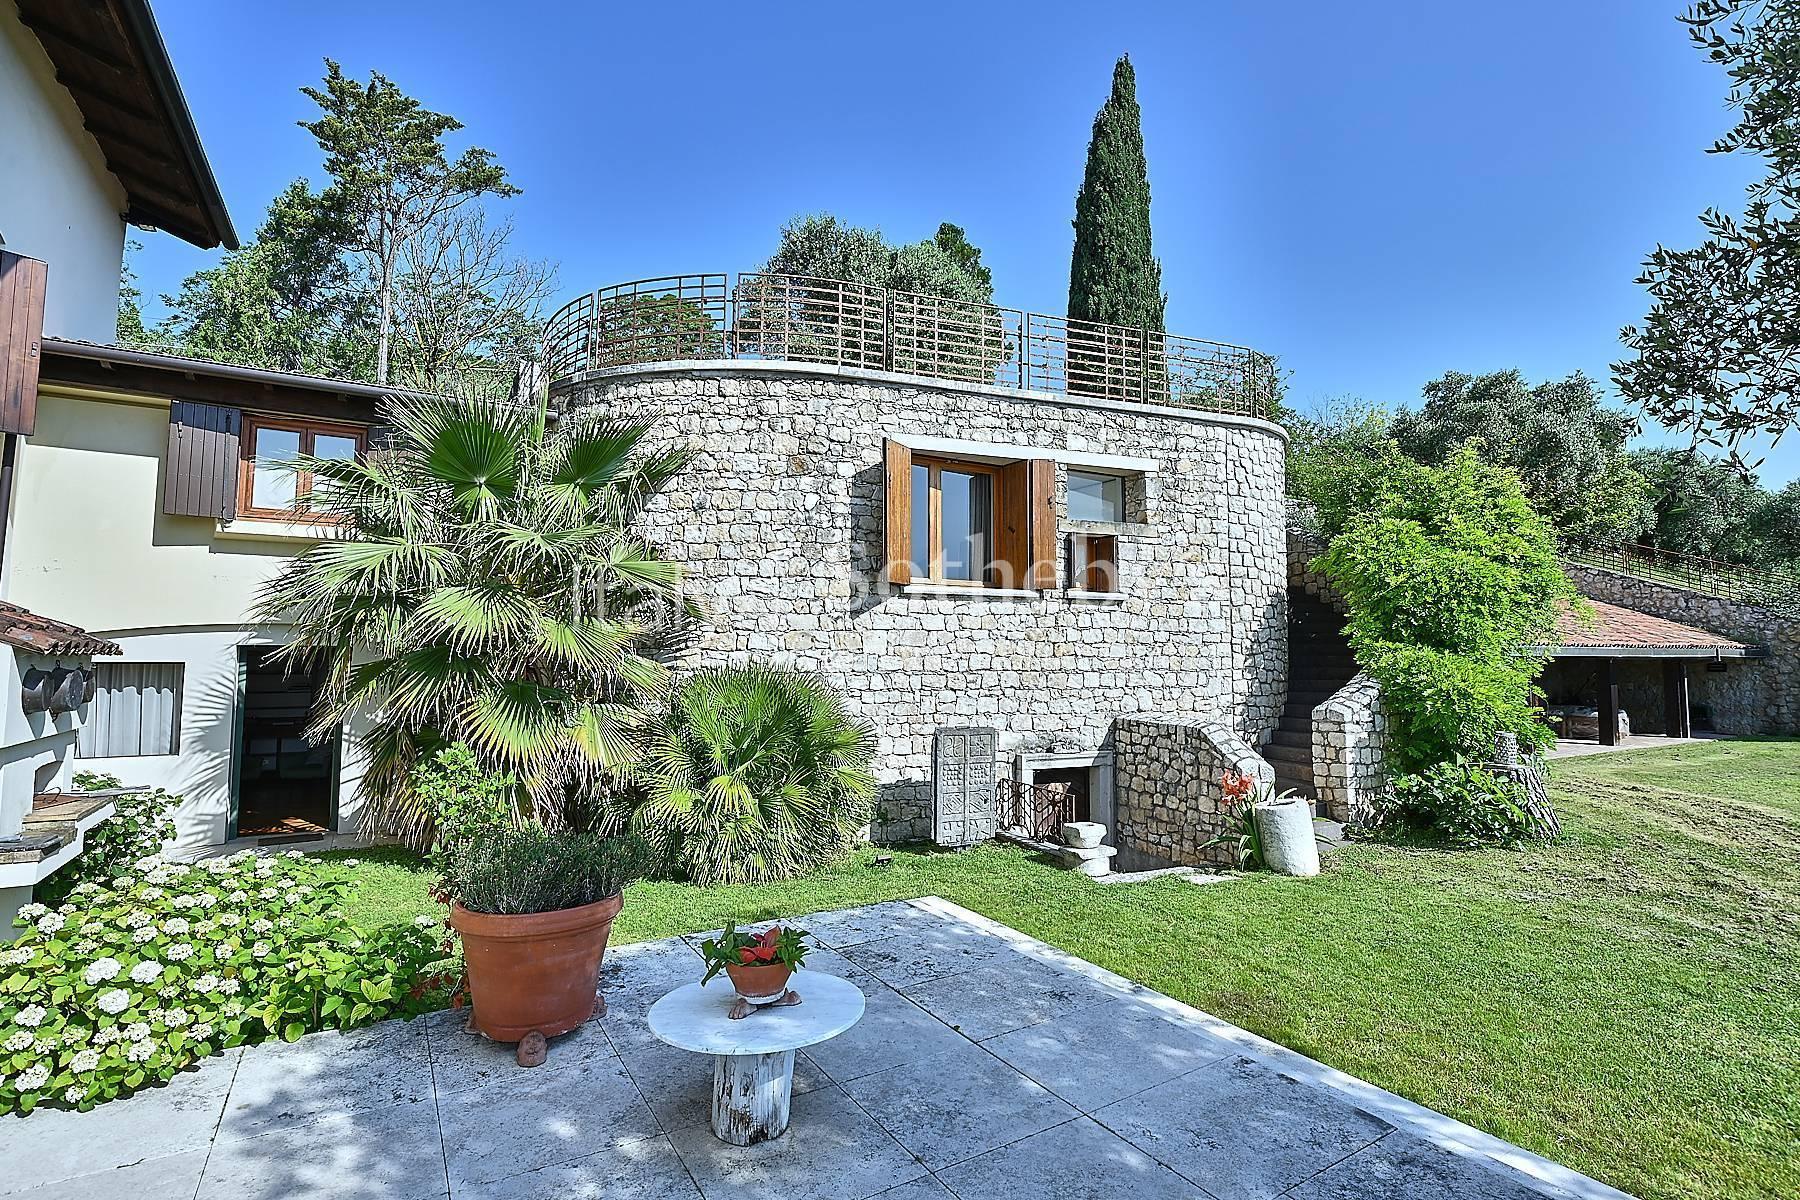 15th century frescoed villa with magnificent panoramic view over the city - 21